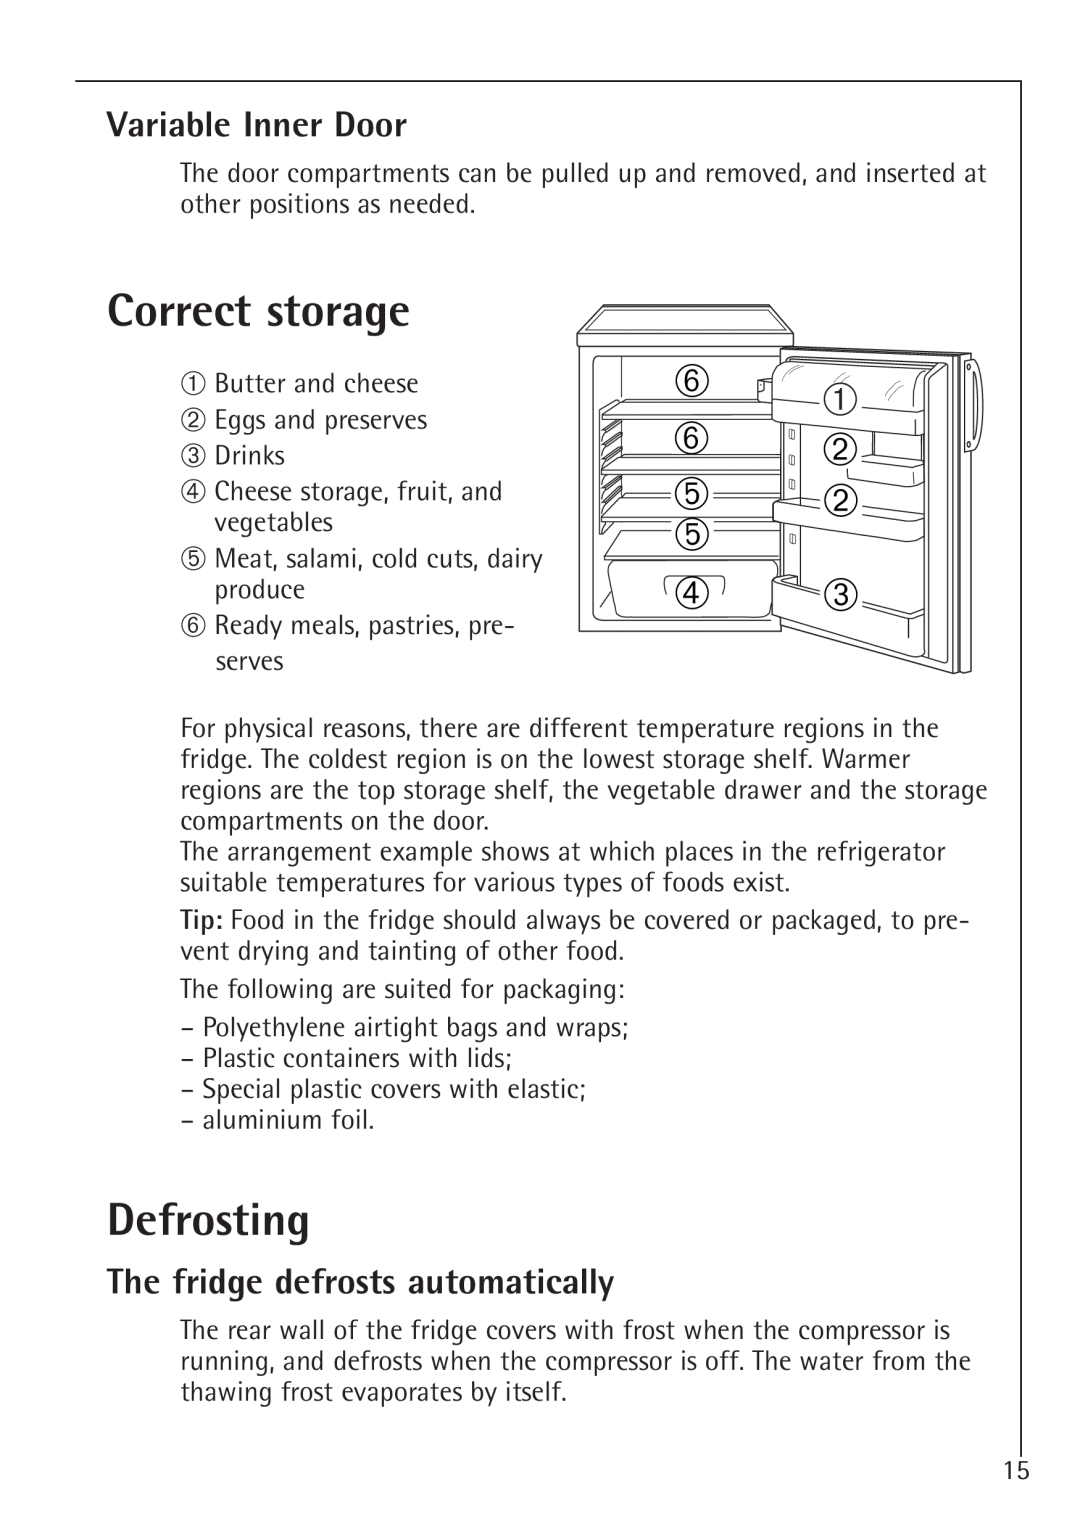 Electrolux 1683-7 TK, 1688-7 TK manual Correct storage, Defrosting, Variable Inner Door, The fridge defrosts automatically 